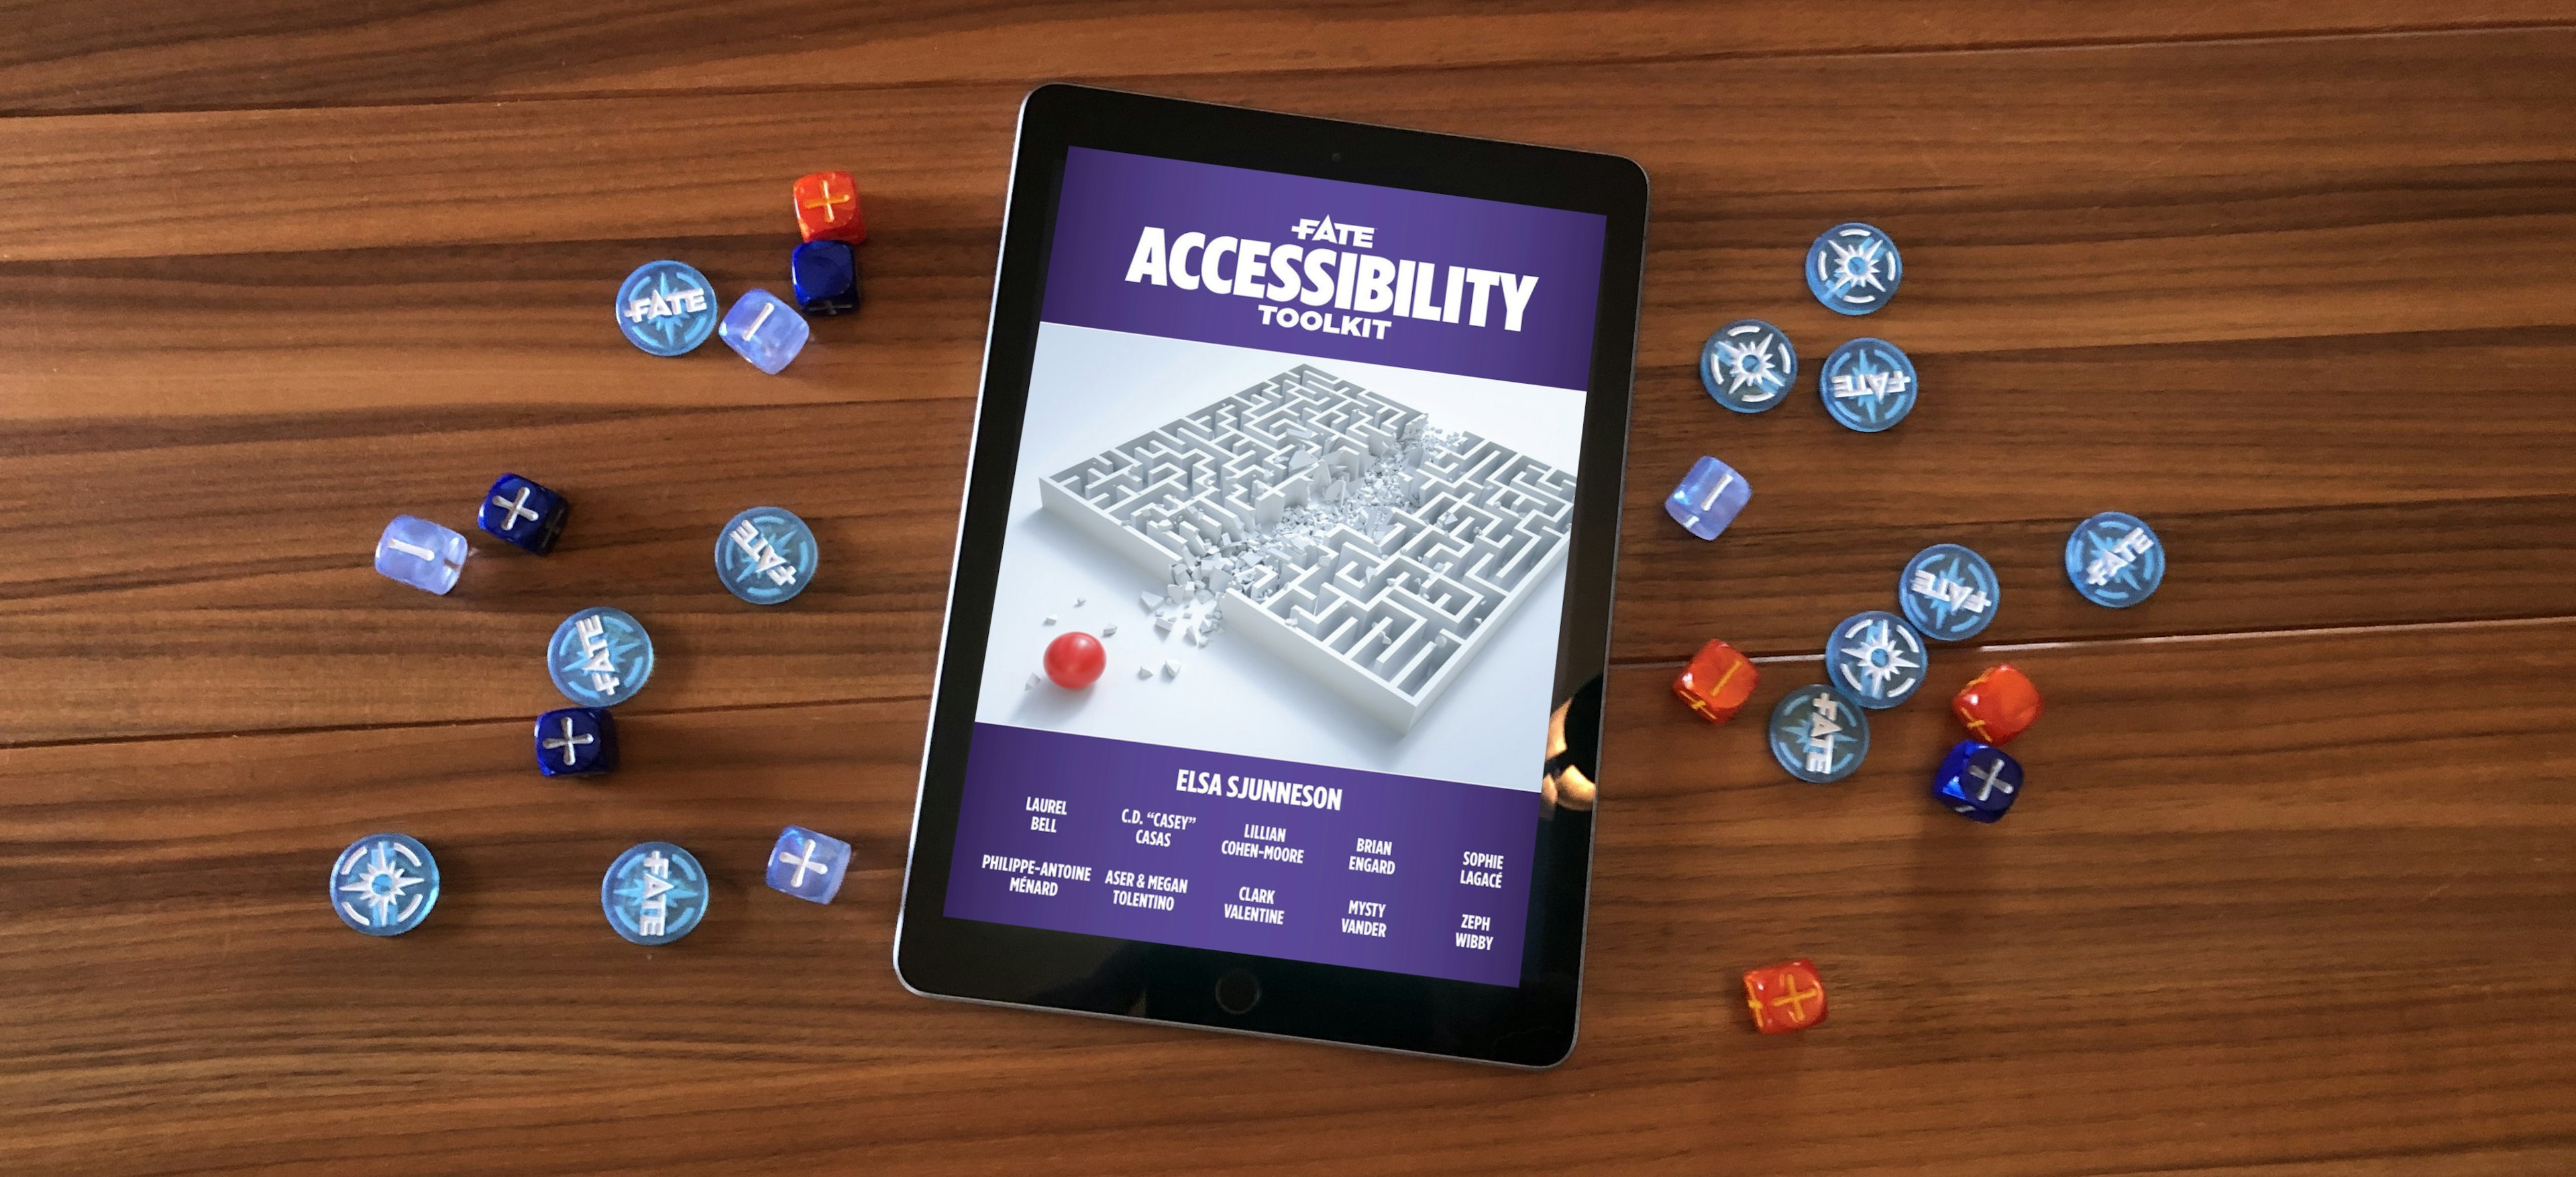 Fate Accessibility Toolkit